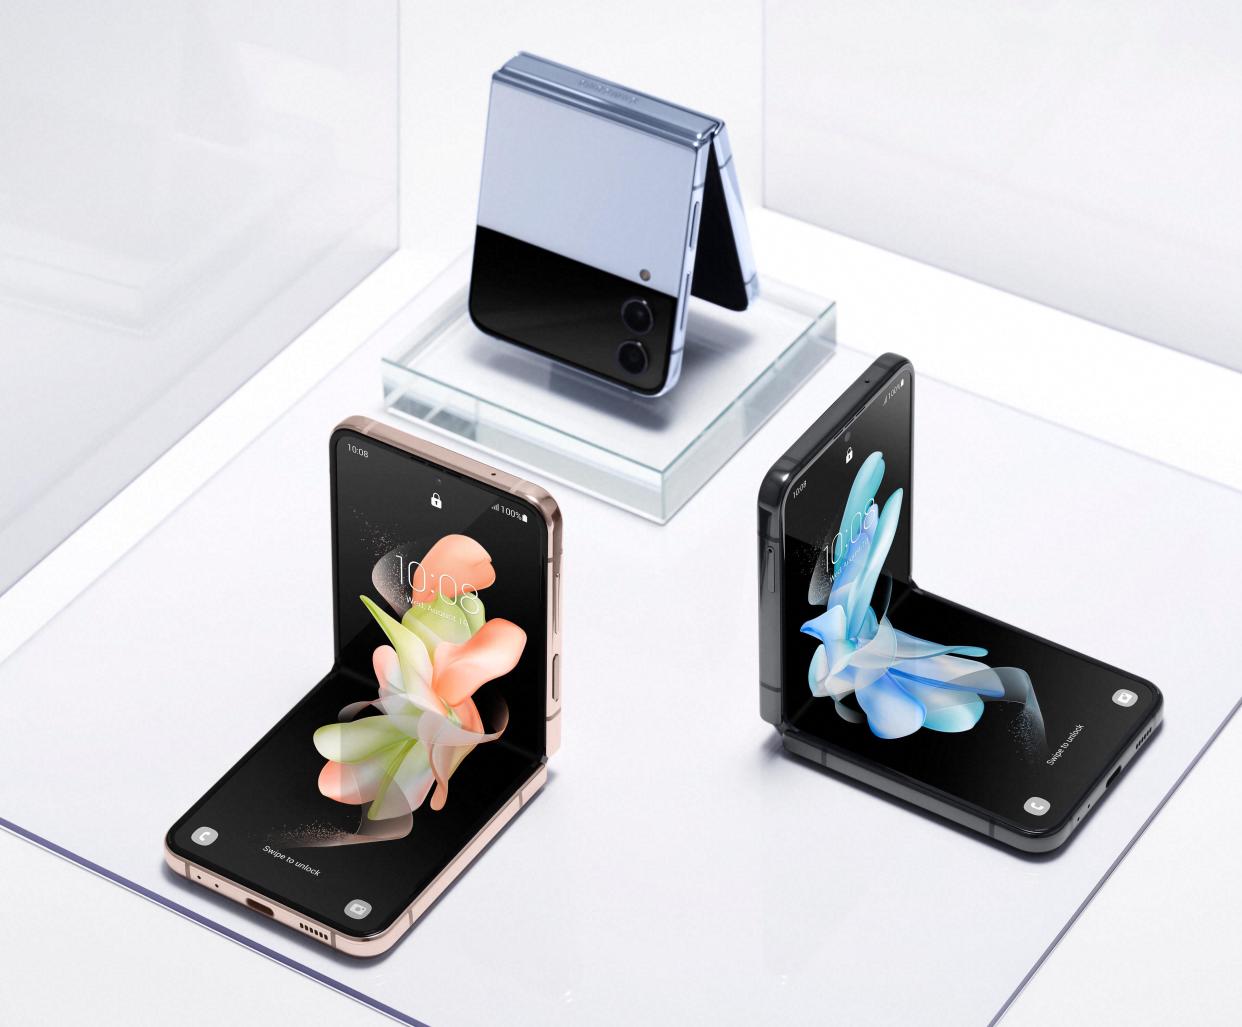 The Galaxy Z Flip4 is designed like a clamshell smartphone. (Image: Samsung)